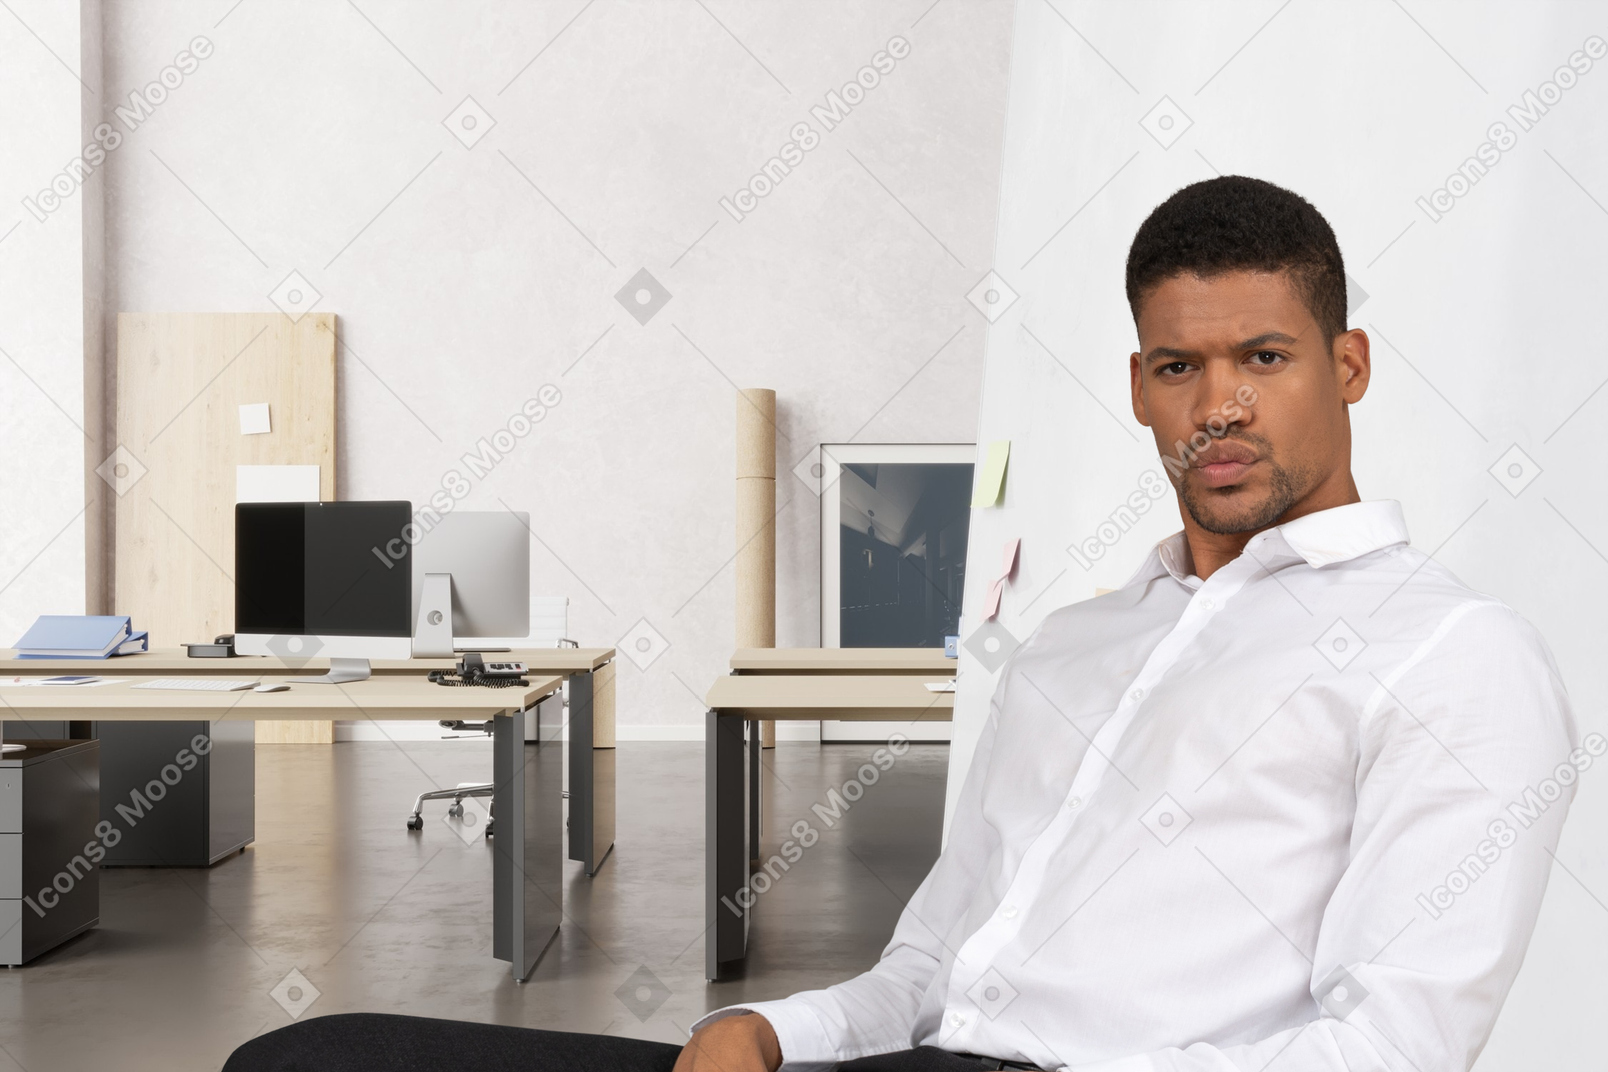 A man sitting on a chair in an office